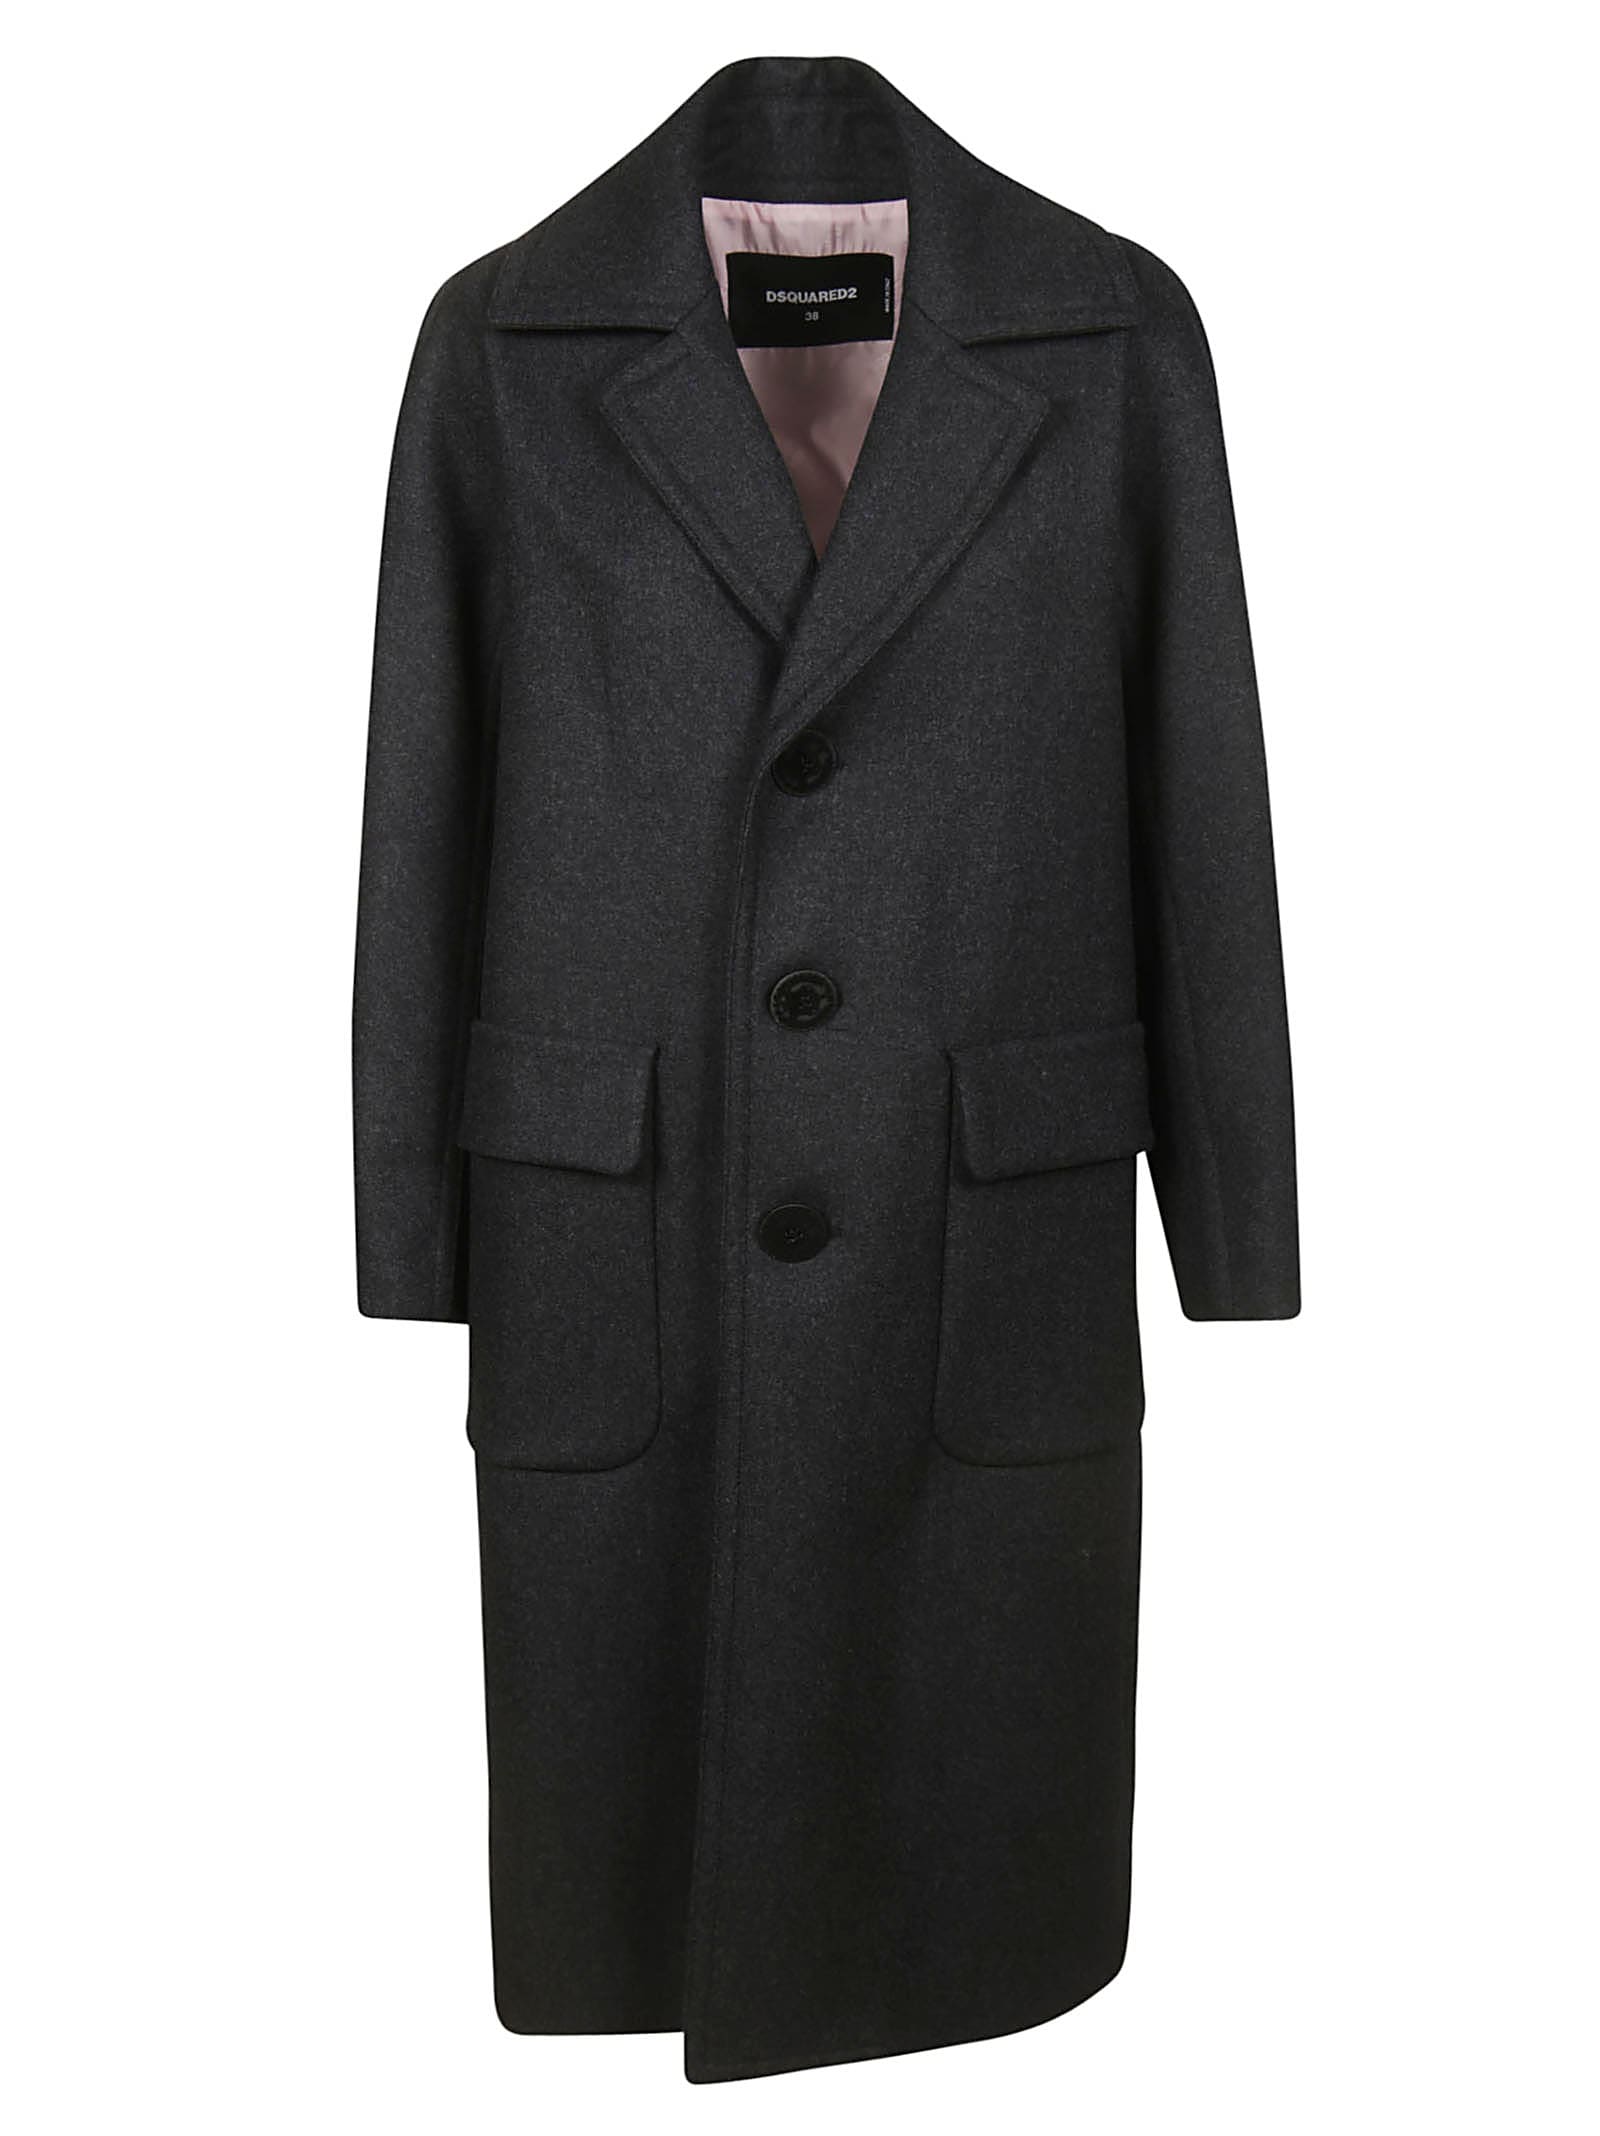 Dsquared2 Single Breasted Coat